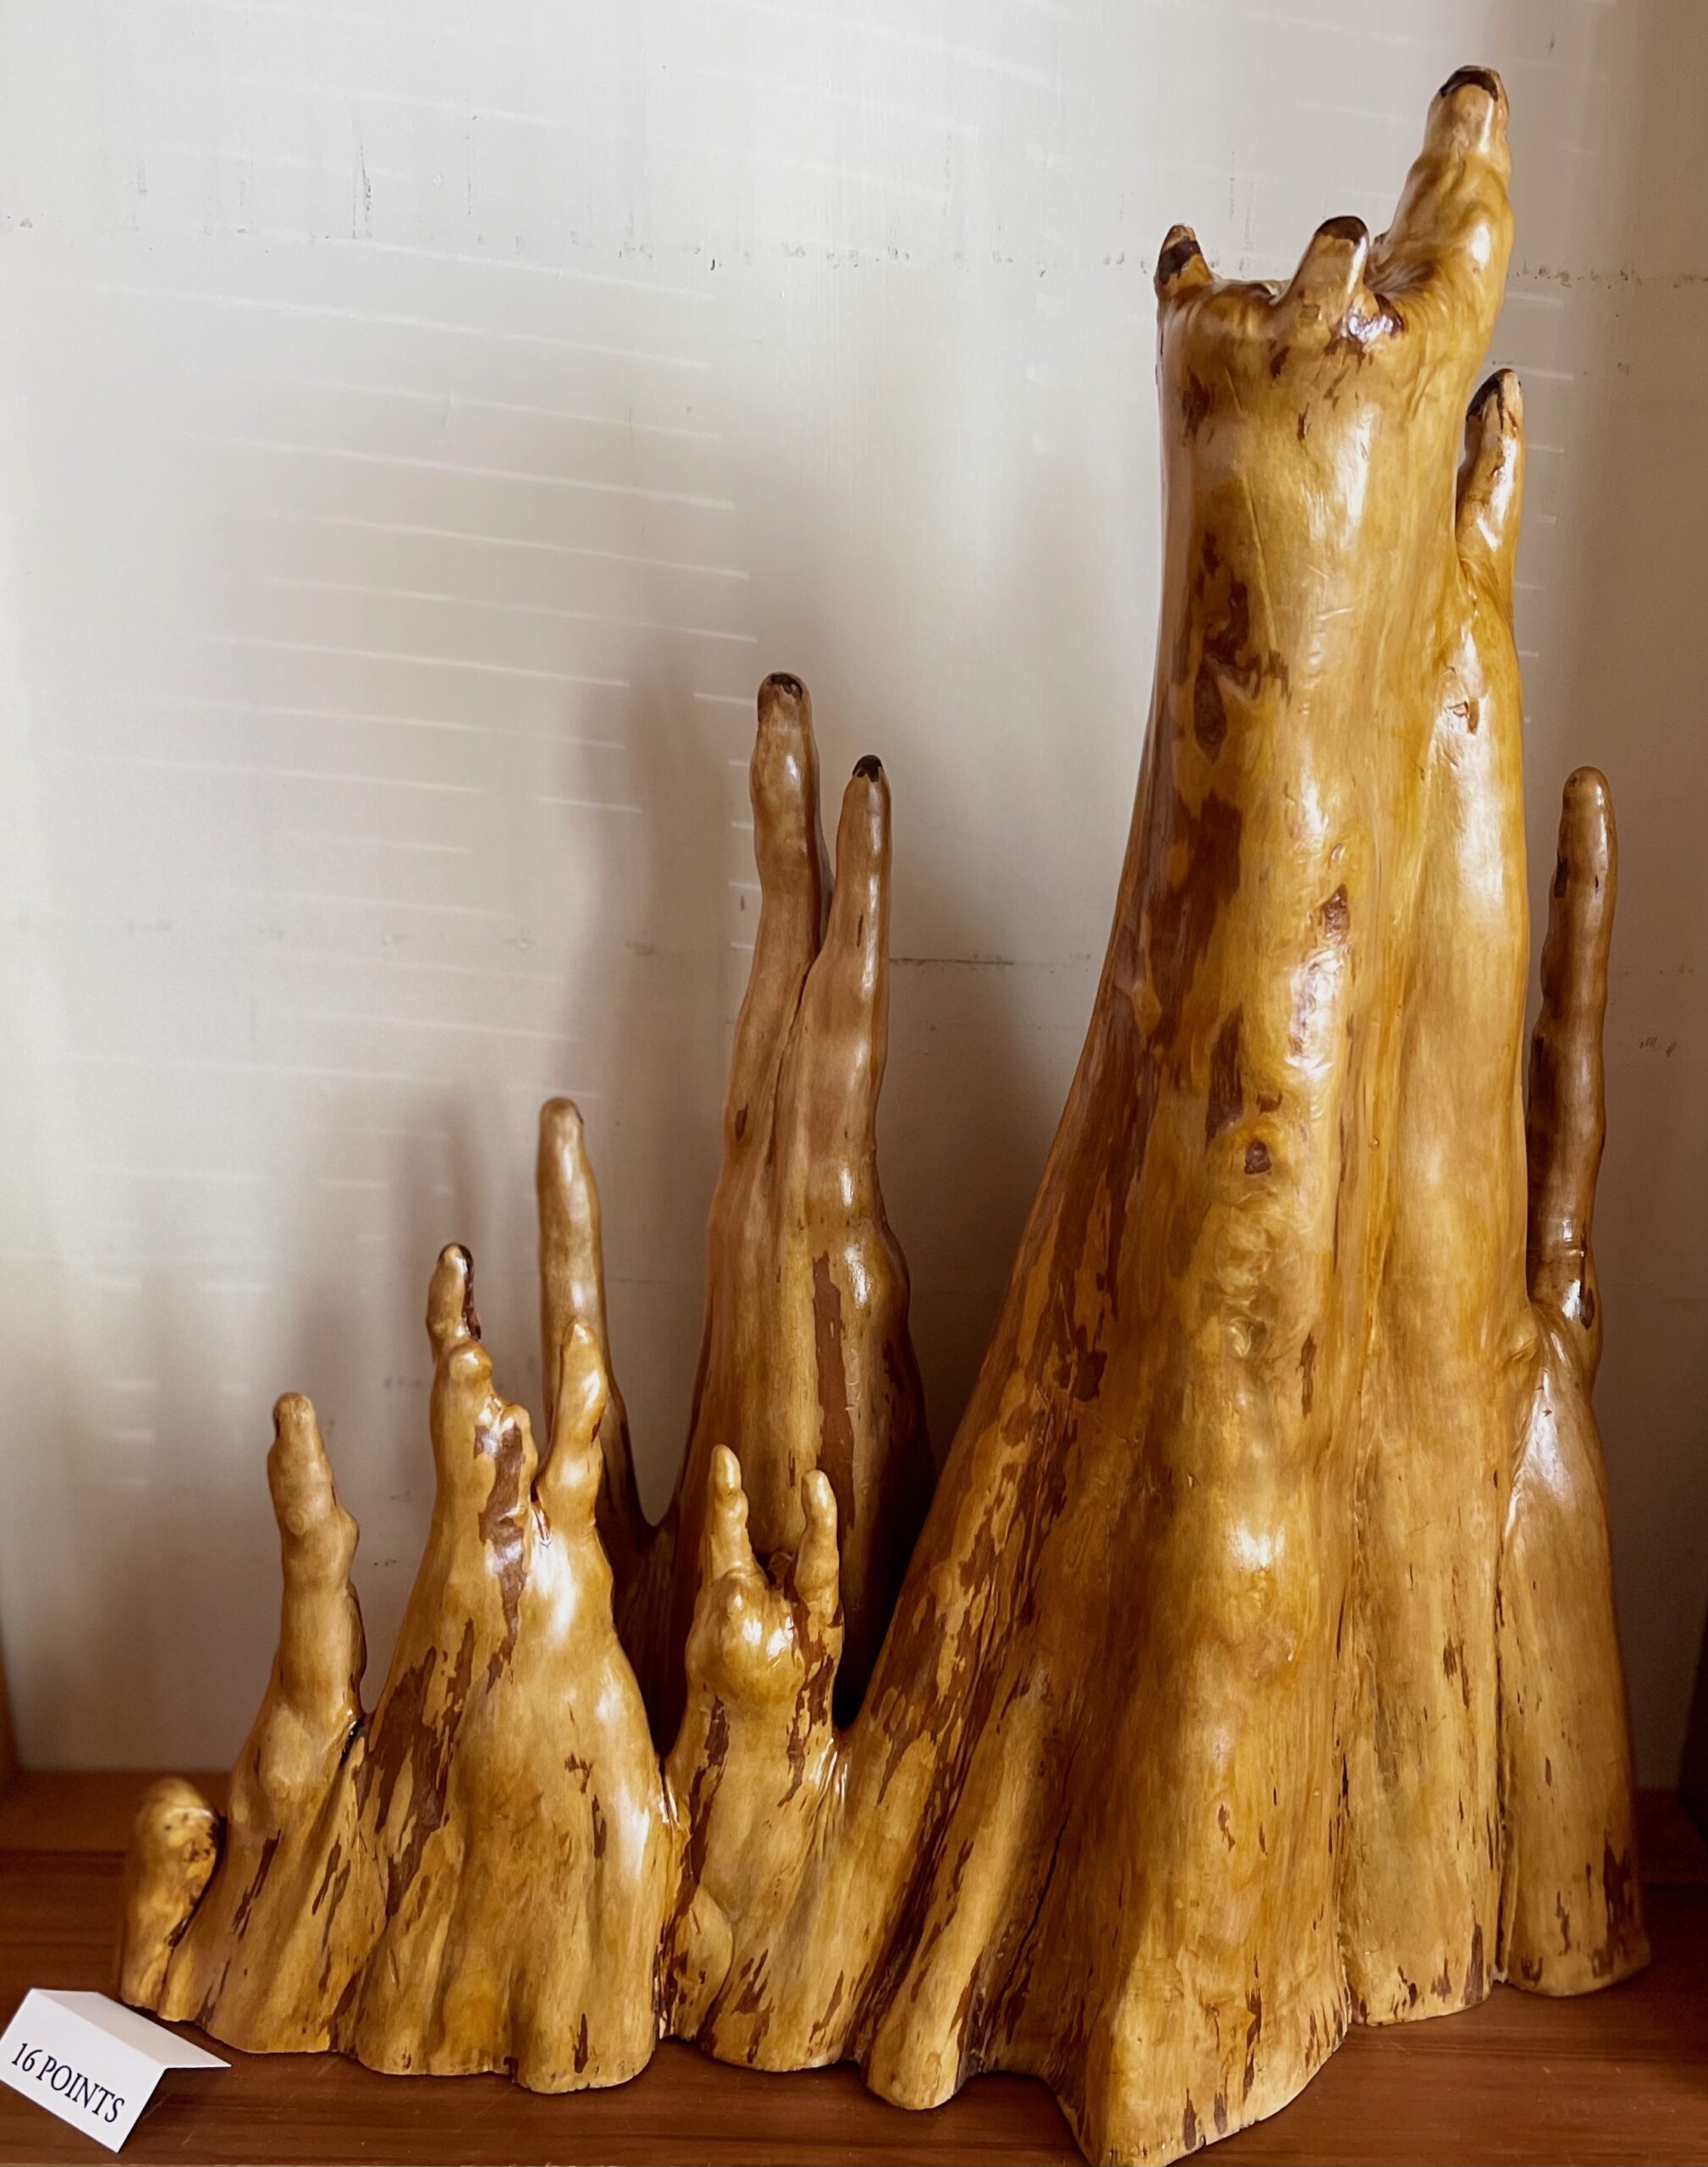 Vintage Cypress Knee Root Wood Sculpture Decor Pulled From Louisiana Swamp